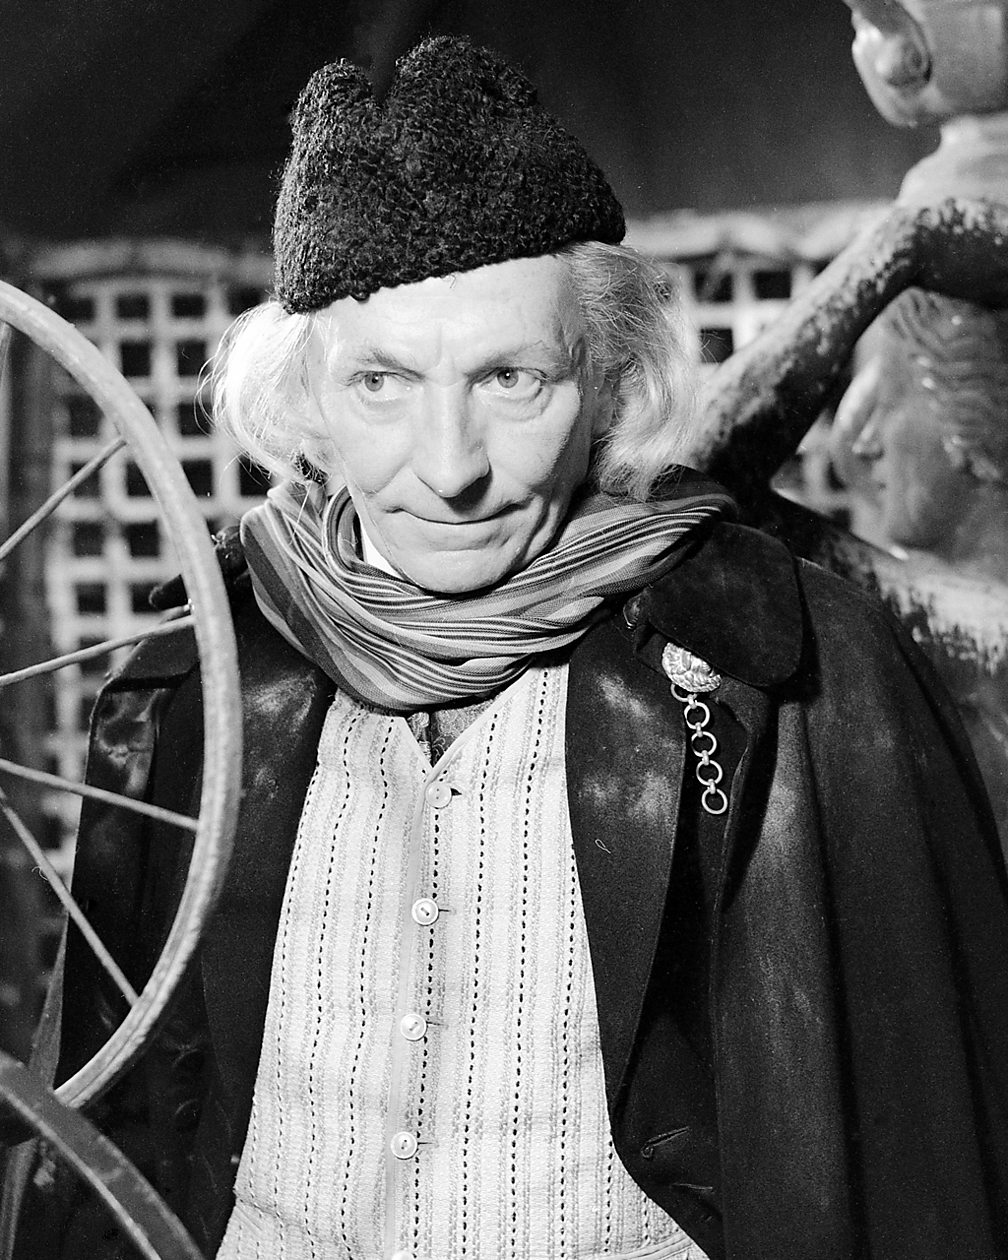 William Hartnell was the first Doctor – his flamboyant costumes set the tone for the series (Credit: BBC)